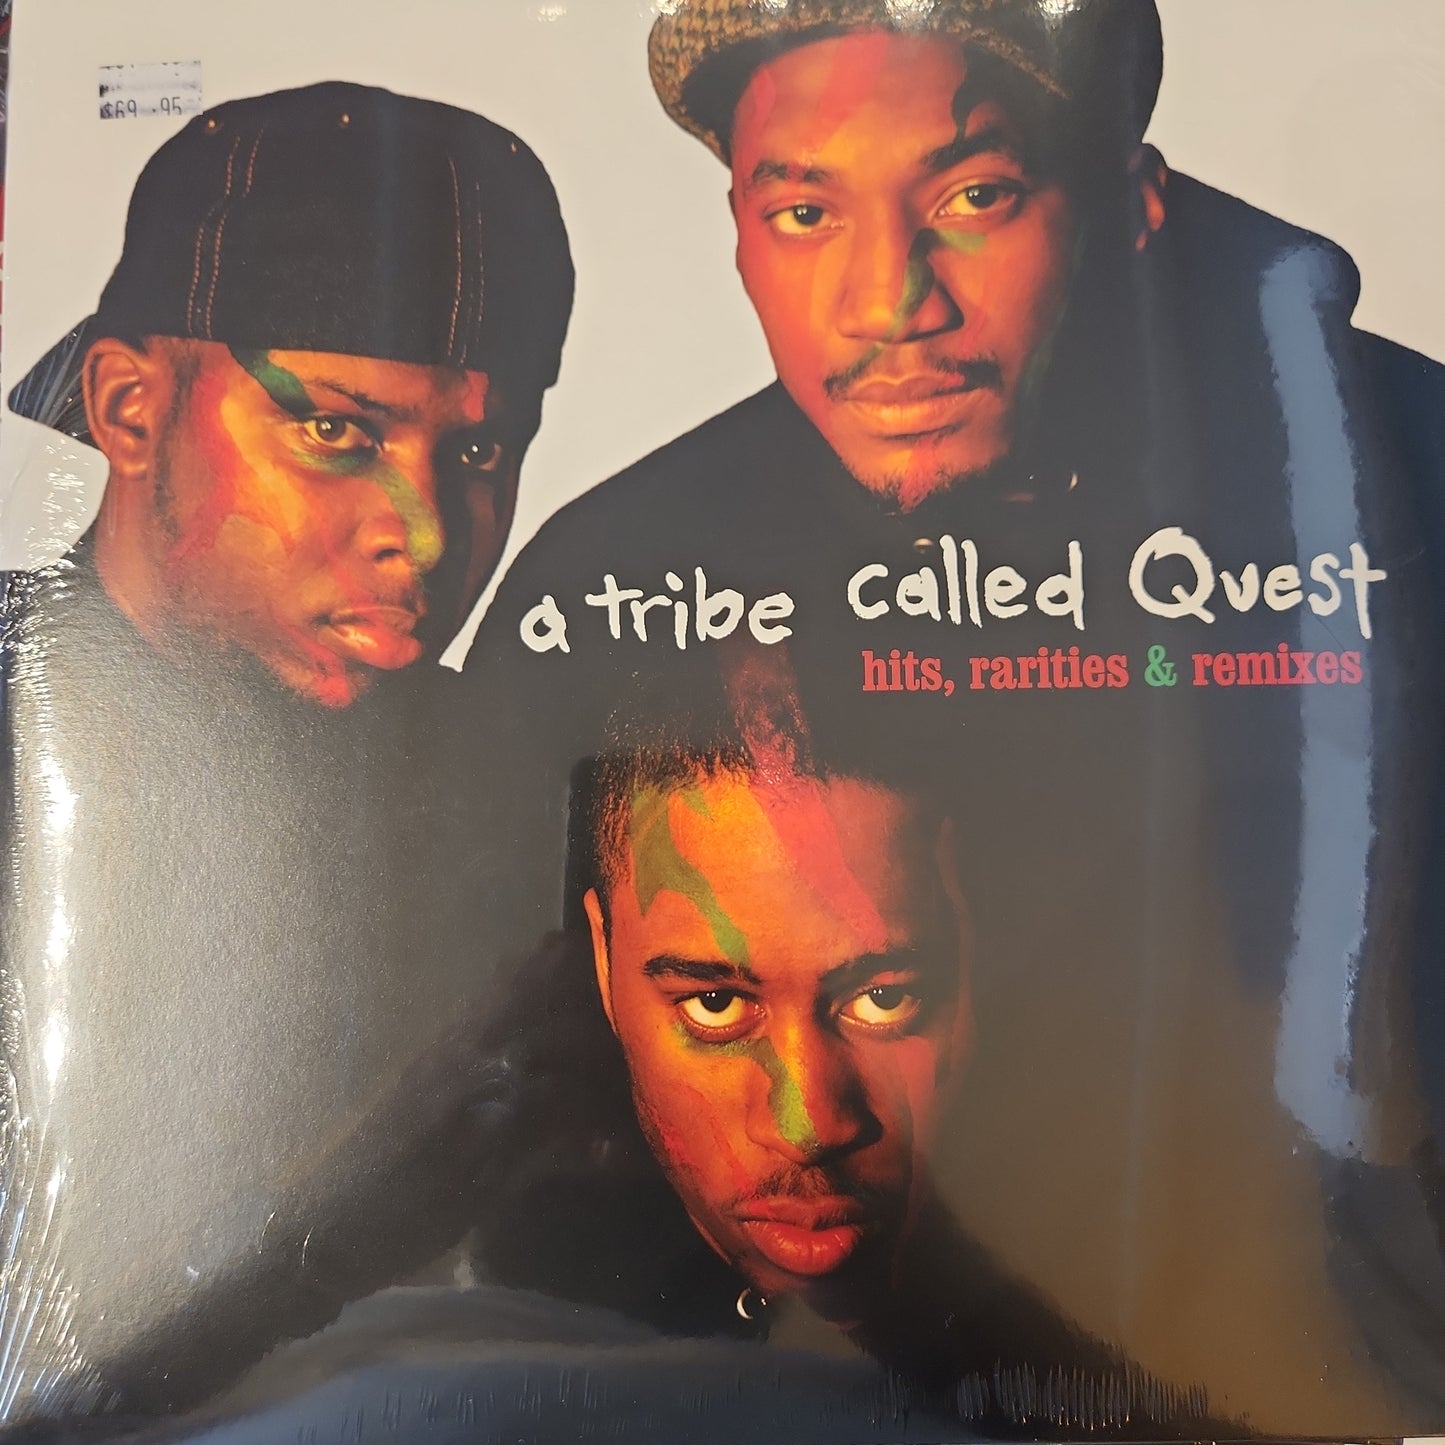 A Tribe Called Quest - Hits, rarities and remixes - Vinyl LP